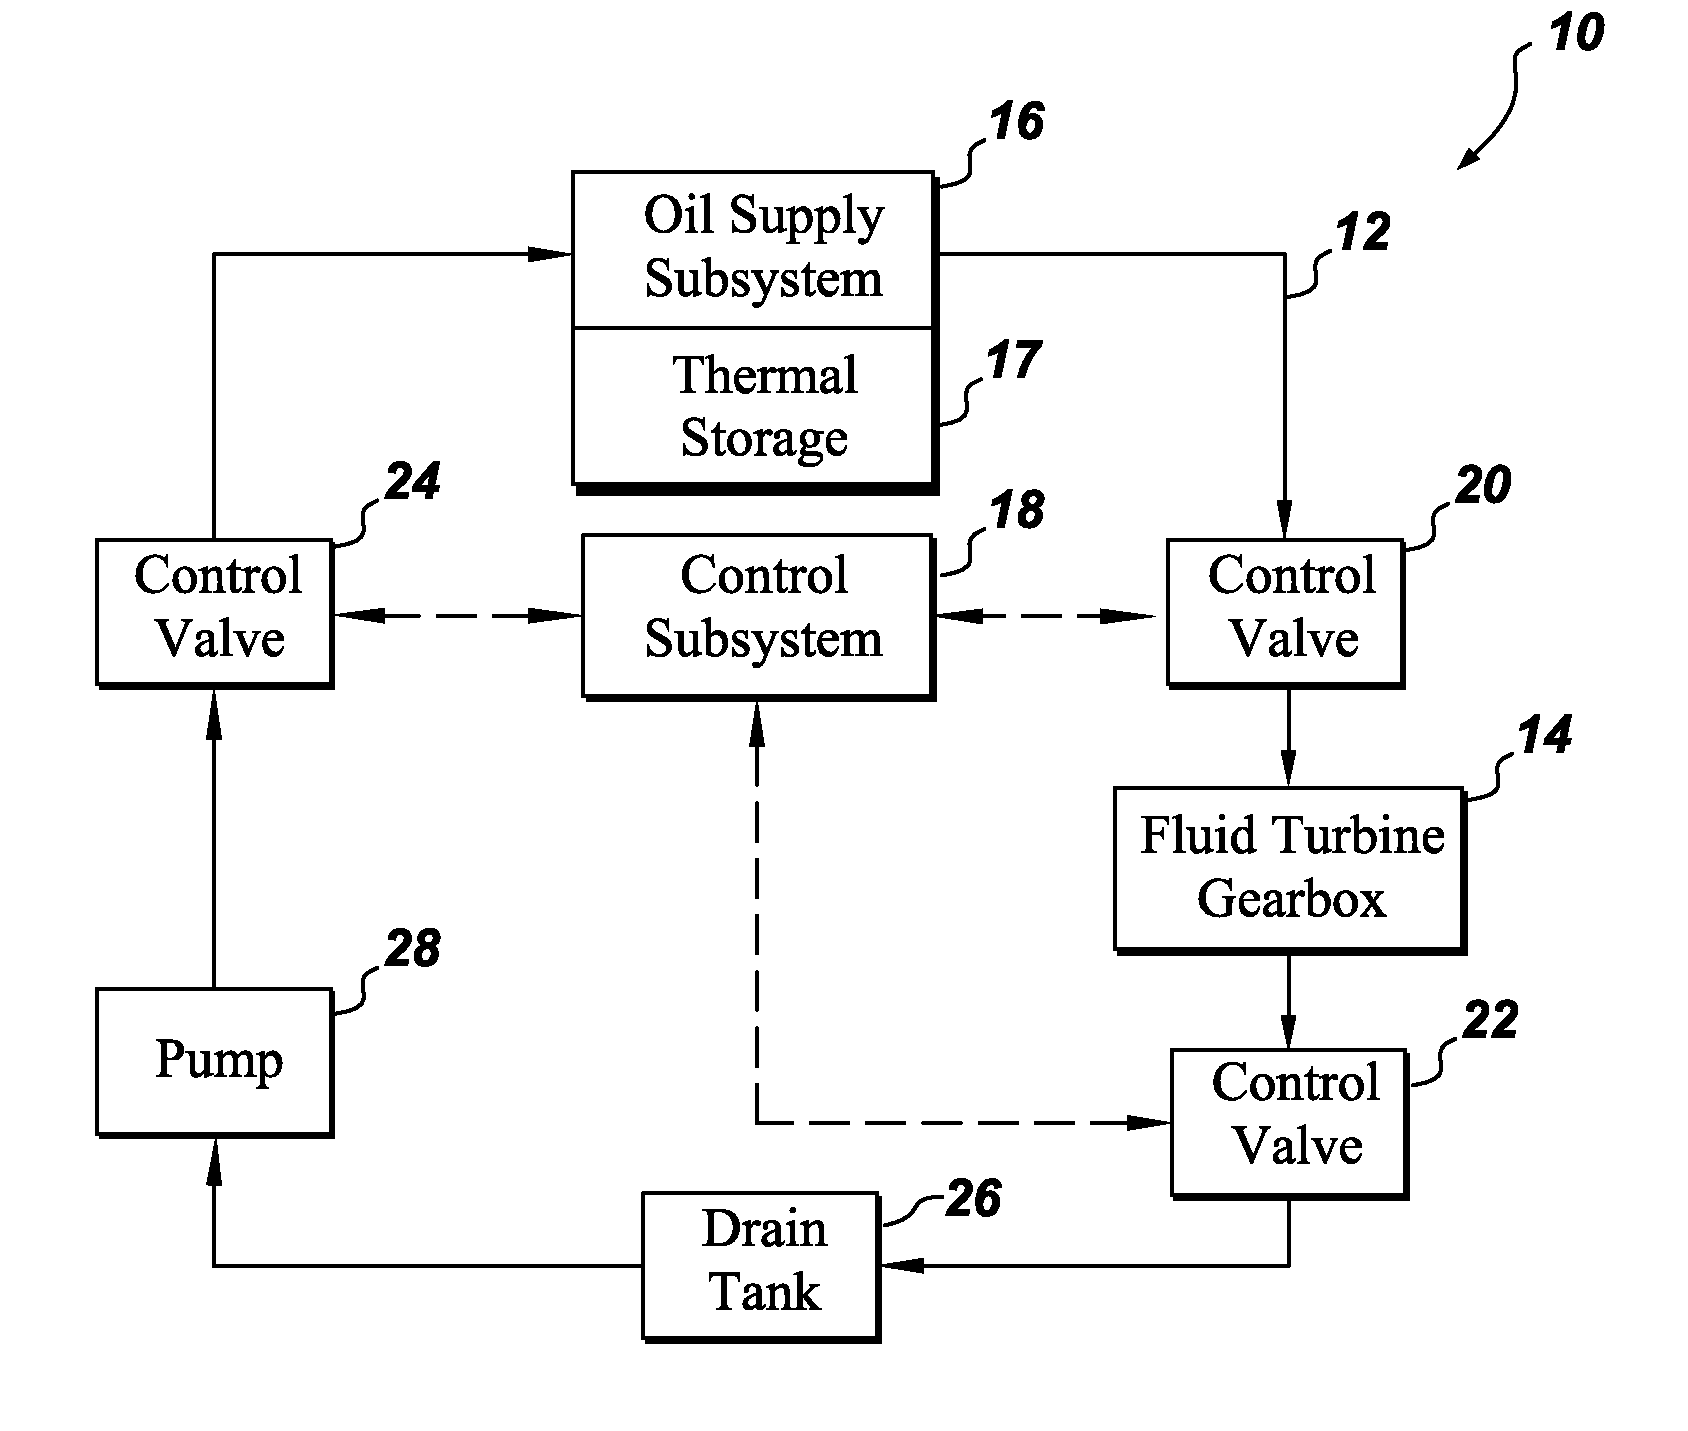 Lubrication of fluid turbine gearbox during idling or loss of electric grid